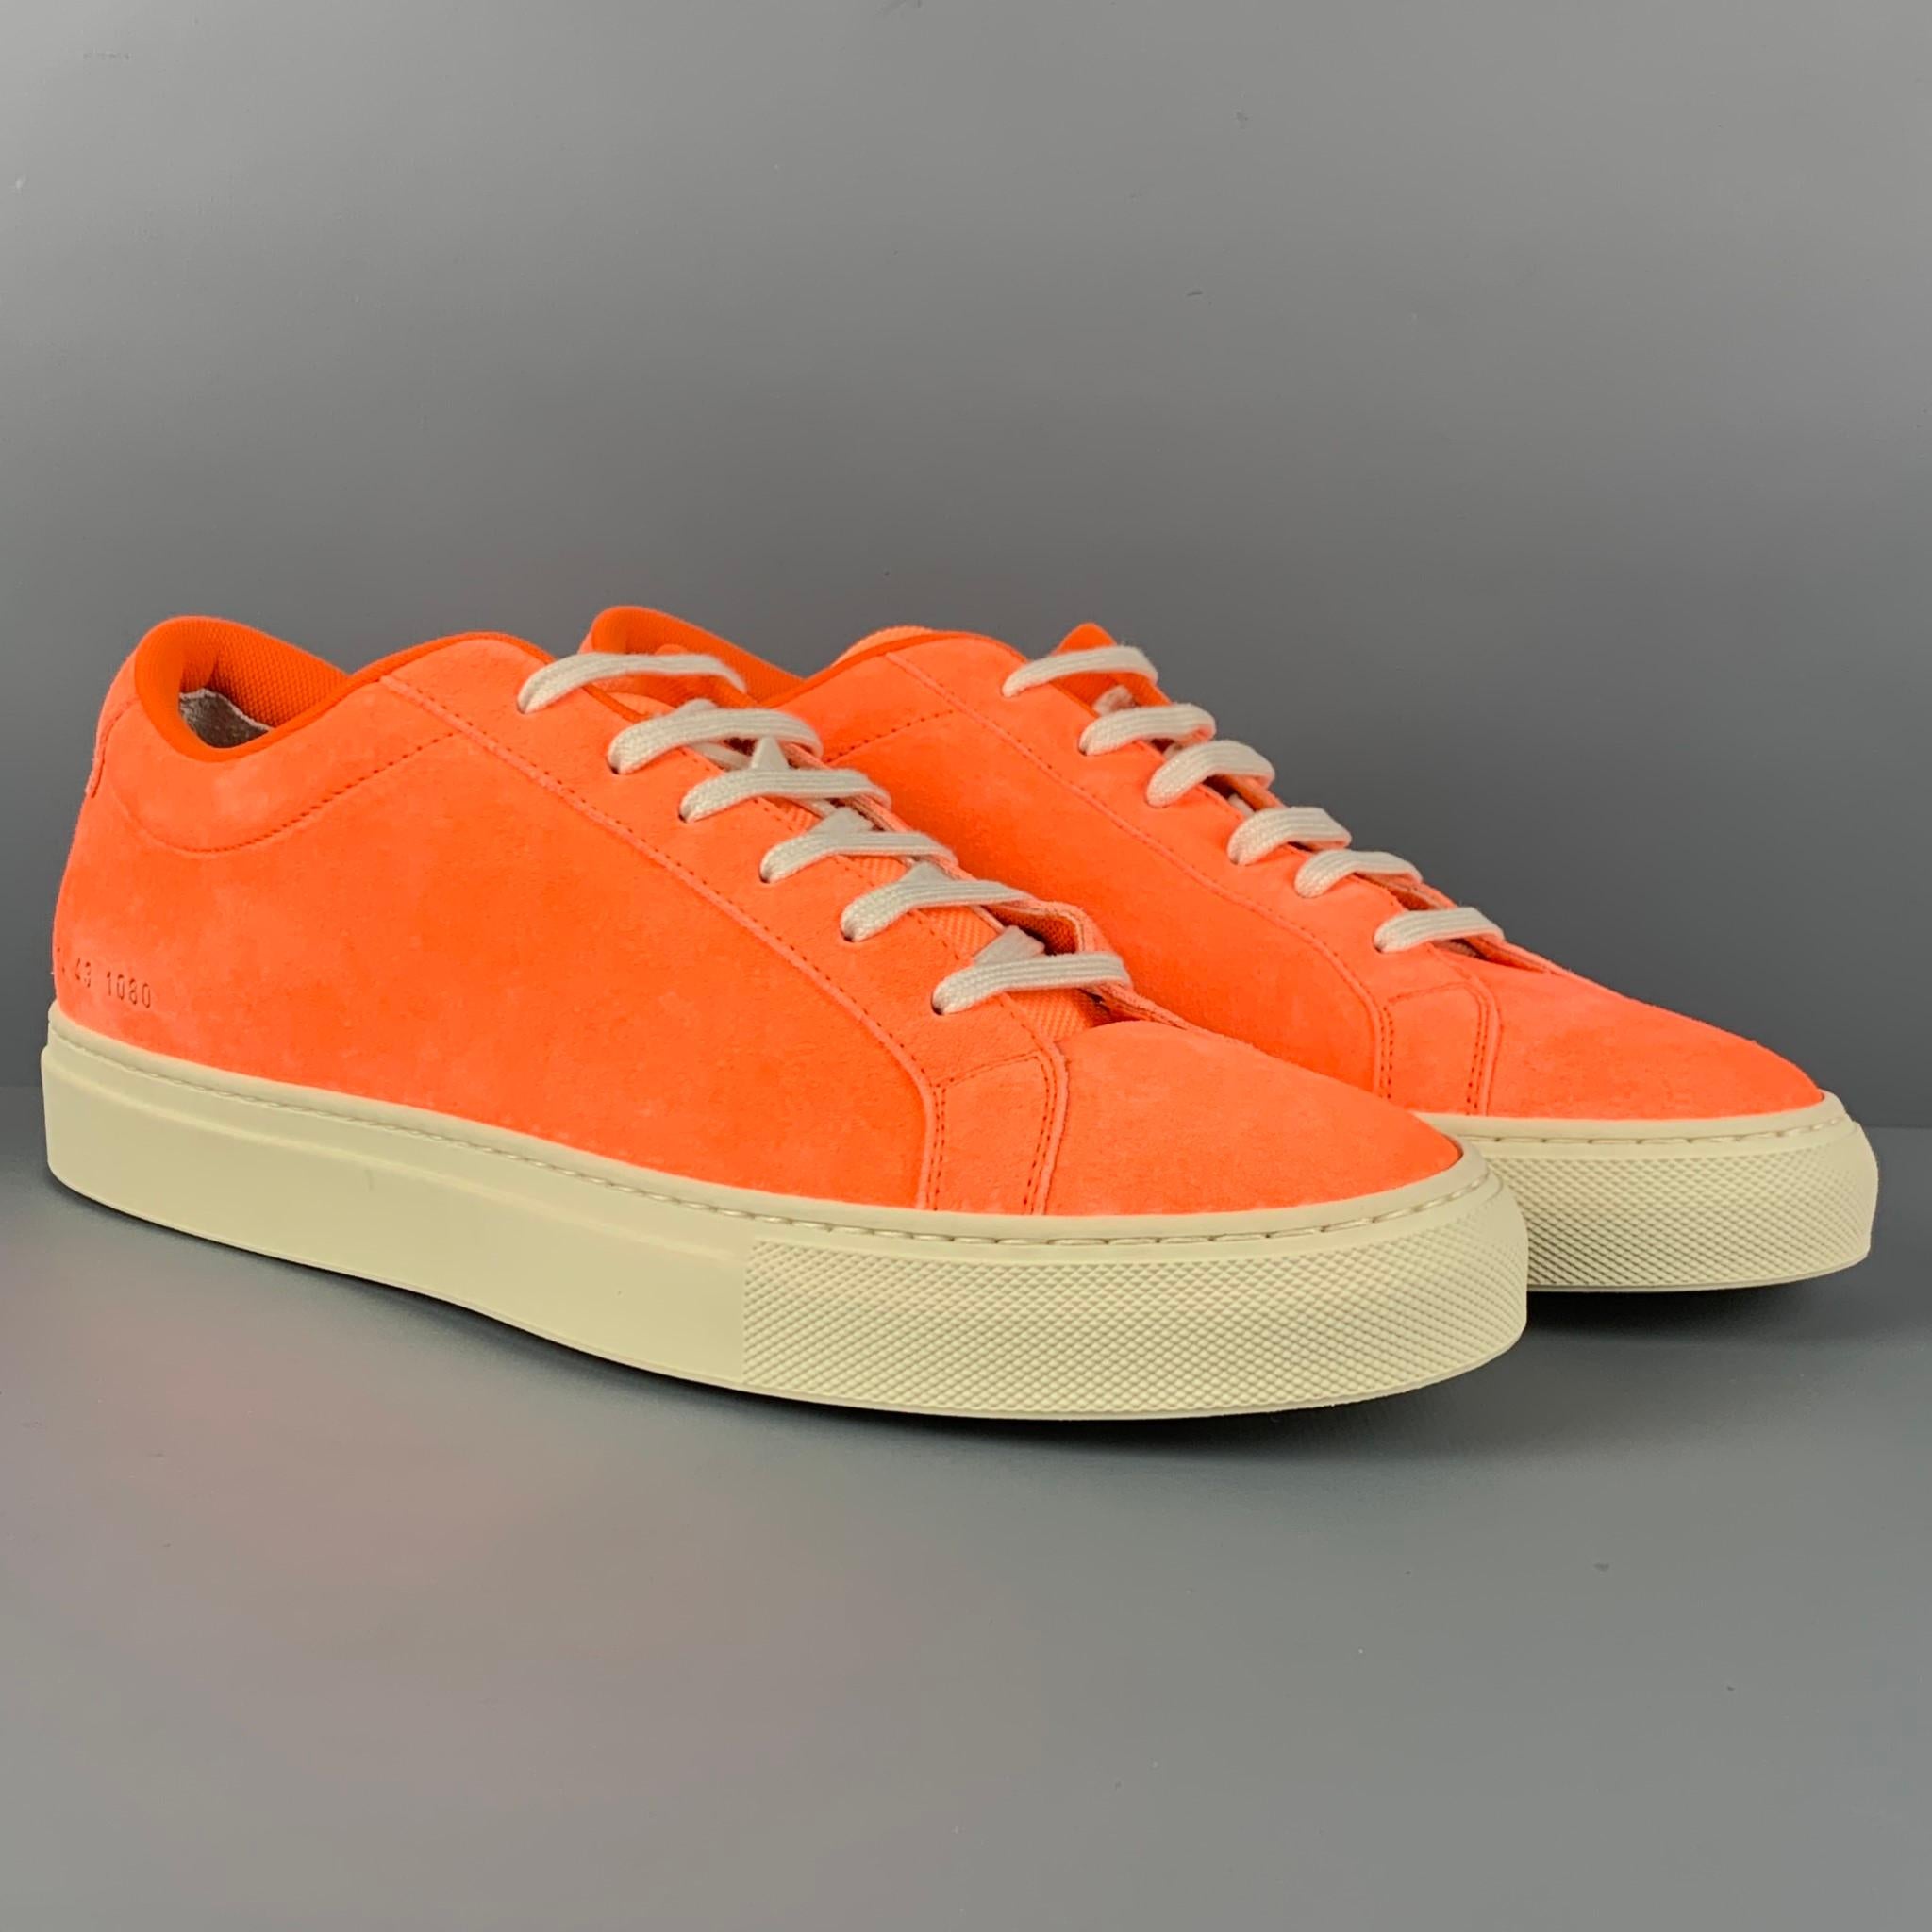 COMMON PROJECTS sneakers comes in a neon orange suede featuring a low top style, rubber sole, and a lace up closure. Made in Italy. 

New With Box. 
Marked: 43

Outsole: 11.75 in. x 4 in. 